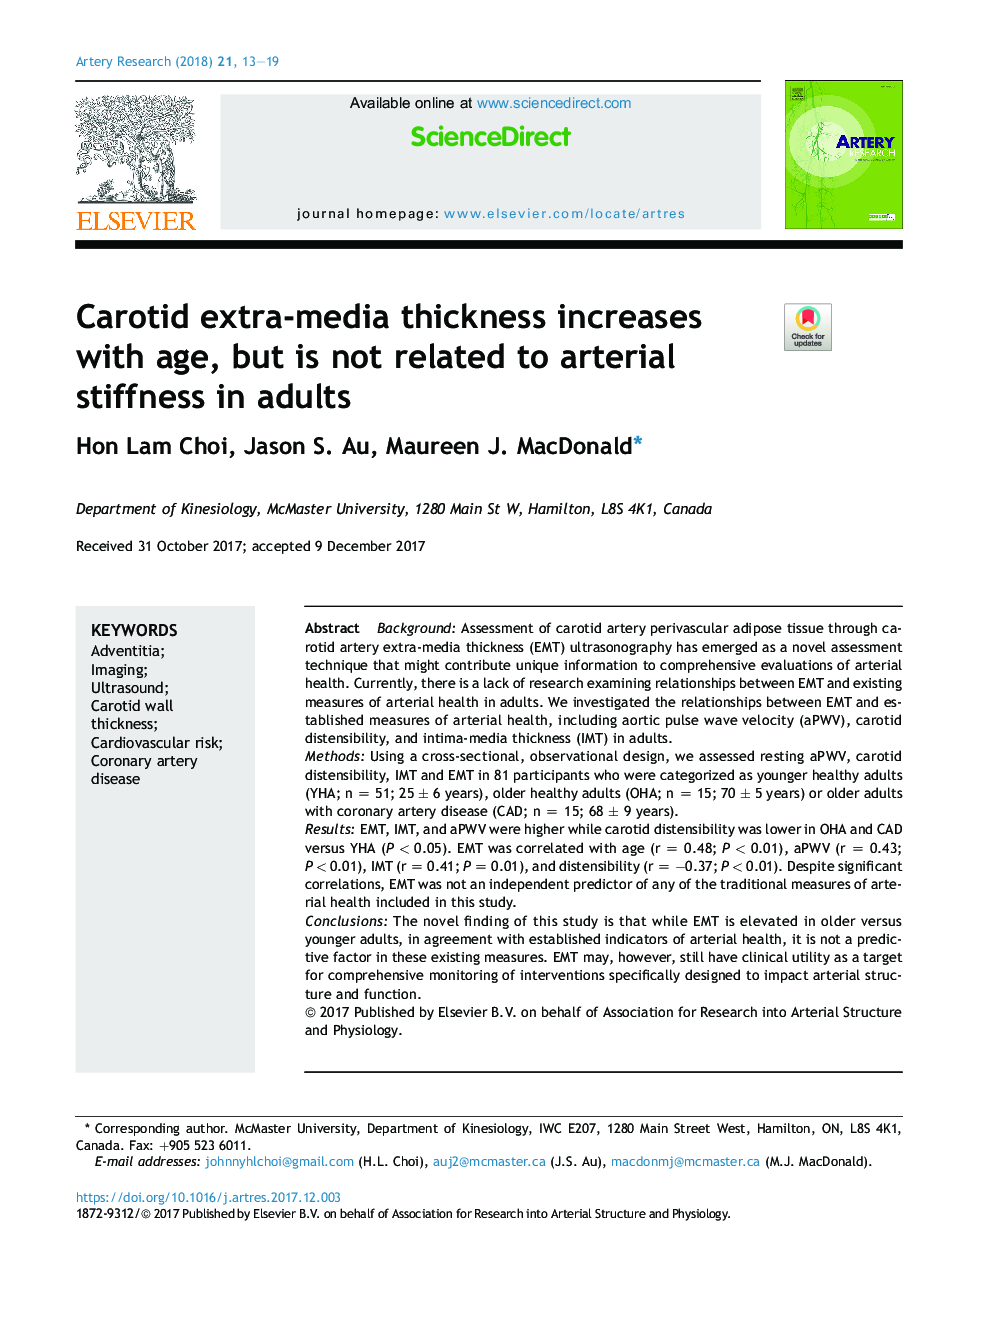 Carotid extra-media thickness increases with age, but is not related to arterial stiffness in adults